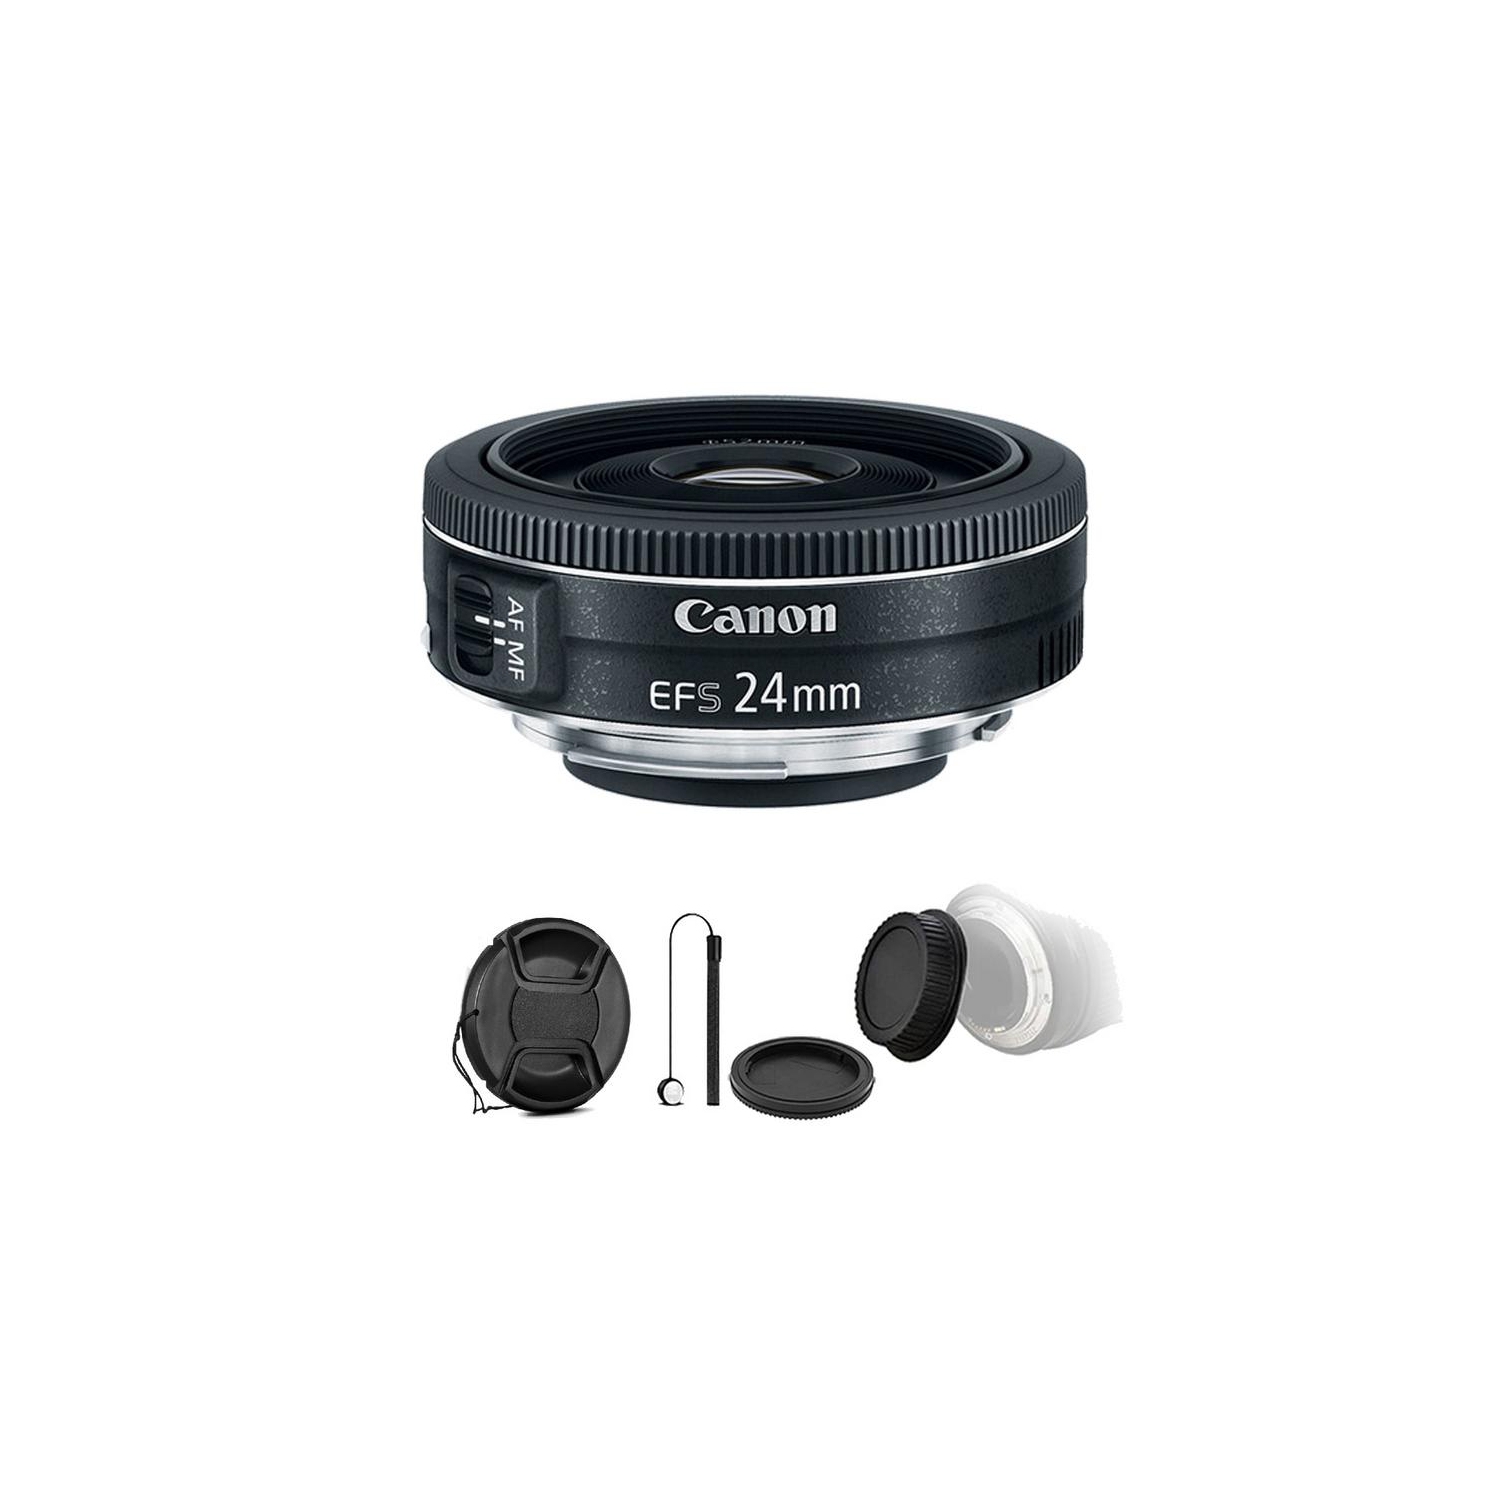 Canon EF-S 24mm f/2.8 STM Lens w/ Accessories For Canon Rebel T3i, T5 and T5i International Version w/Seller Warranty